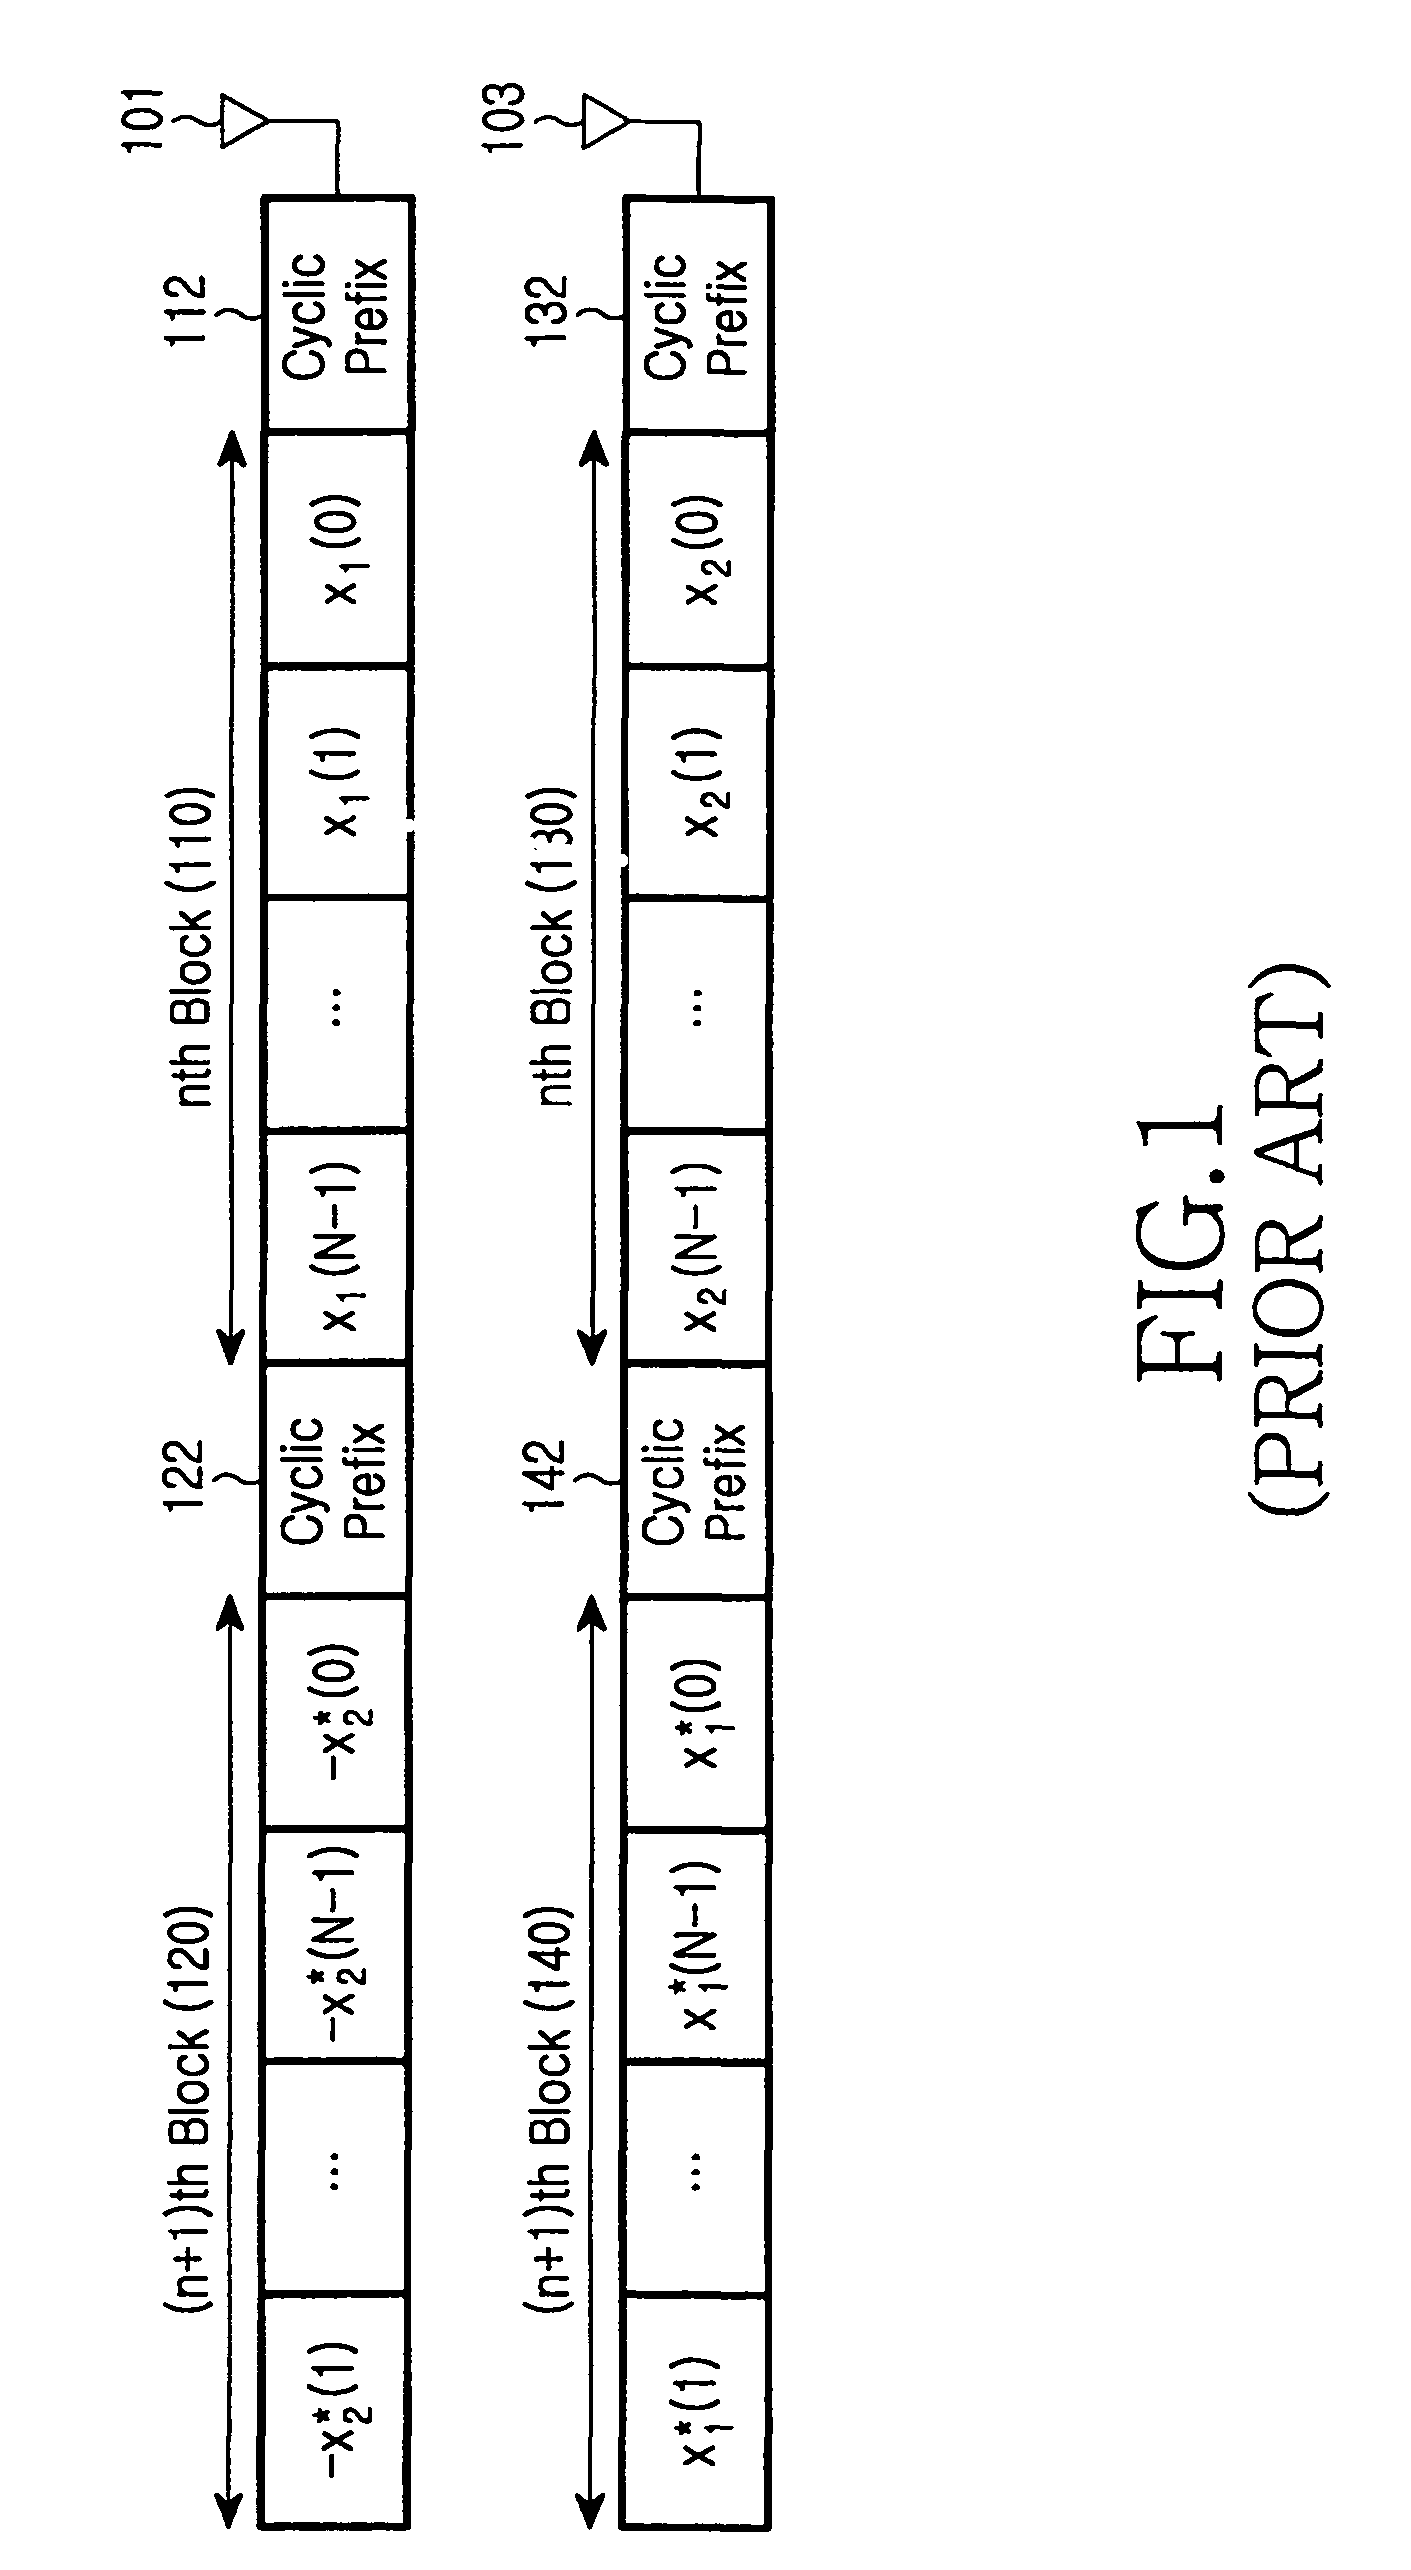 Apparatus and method for transmitting and receiving a signal in a wireless communication system